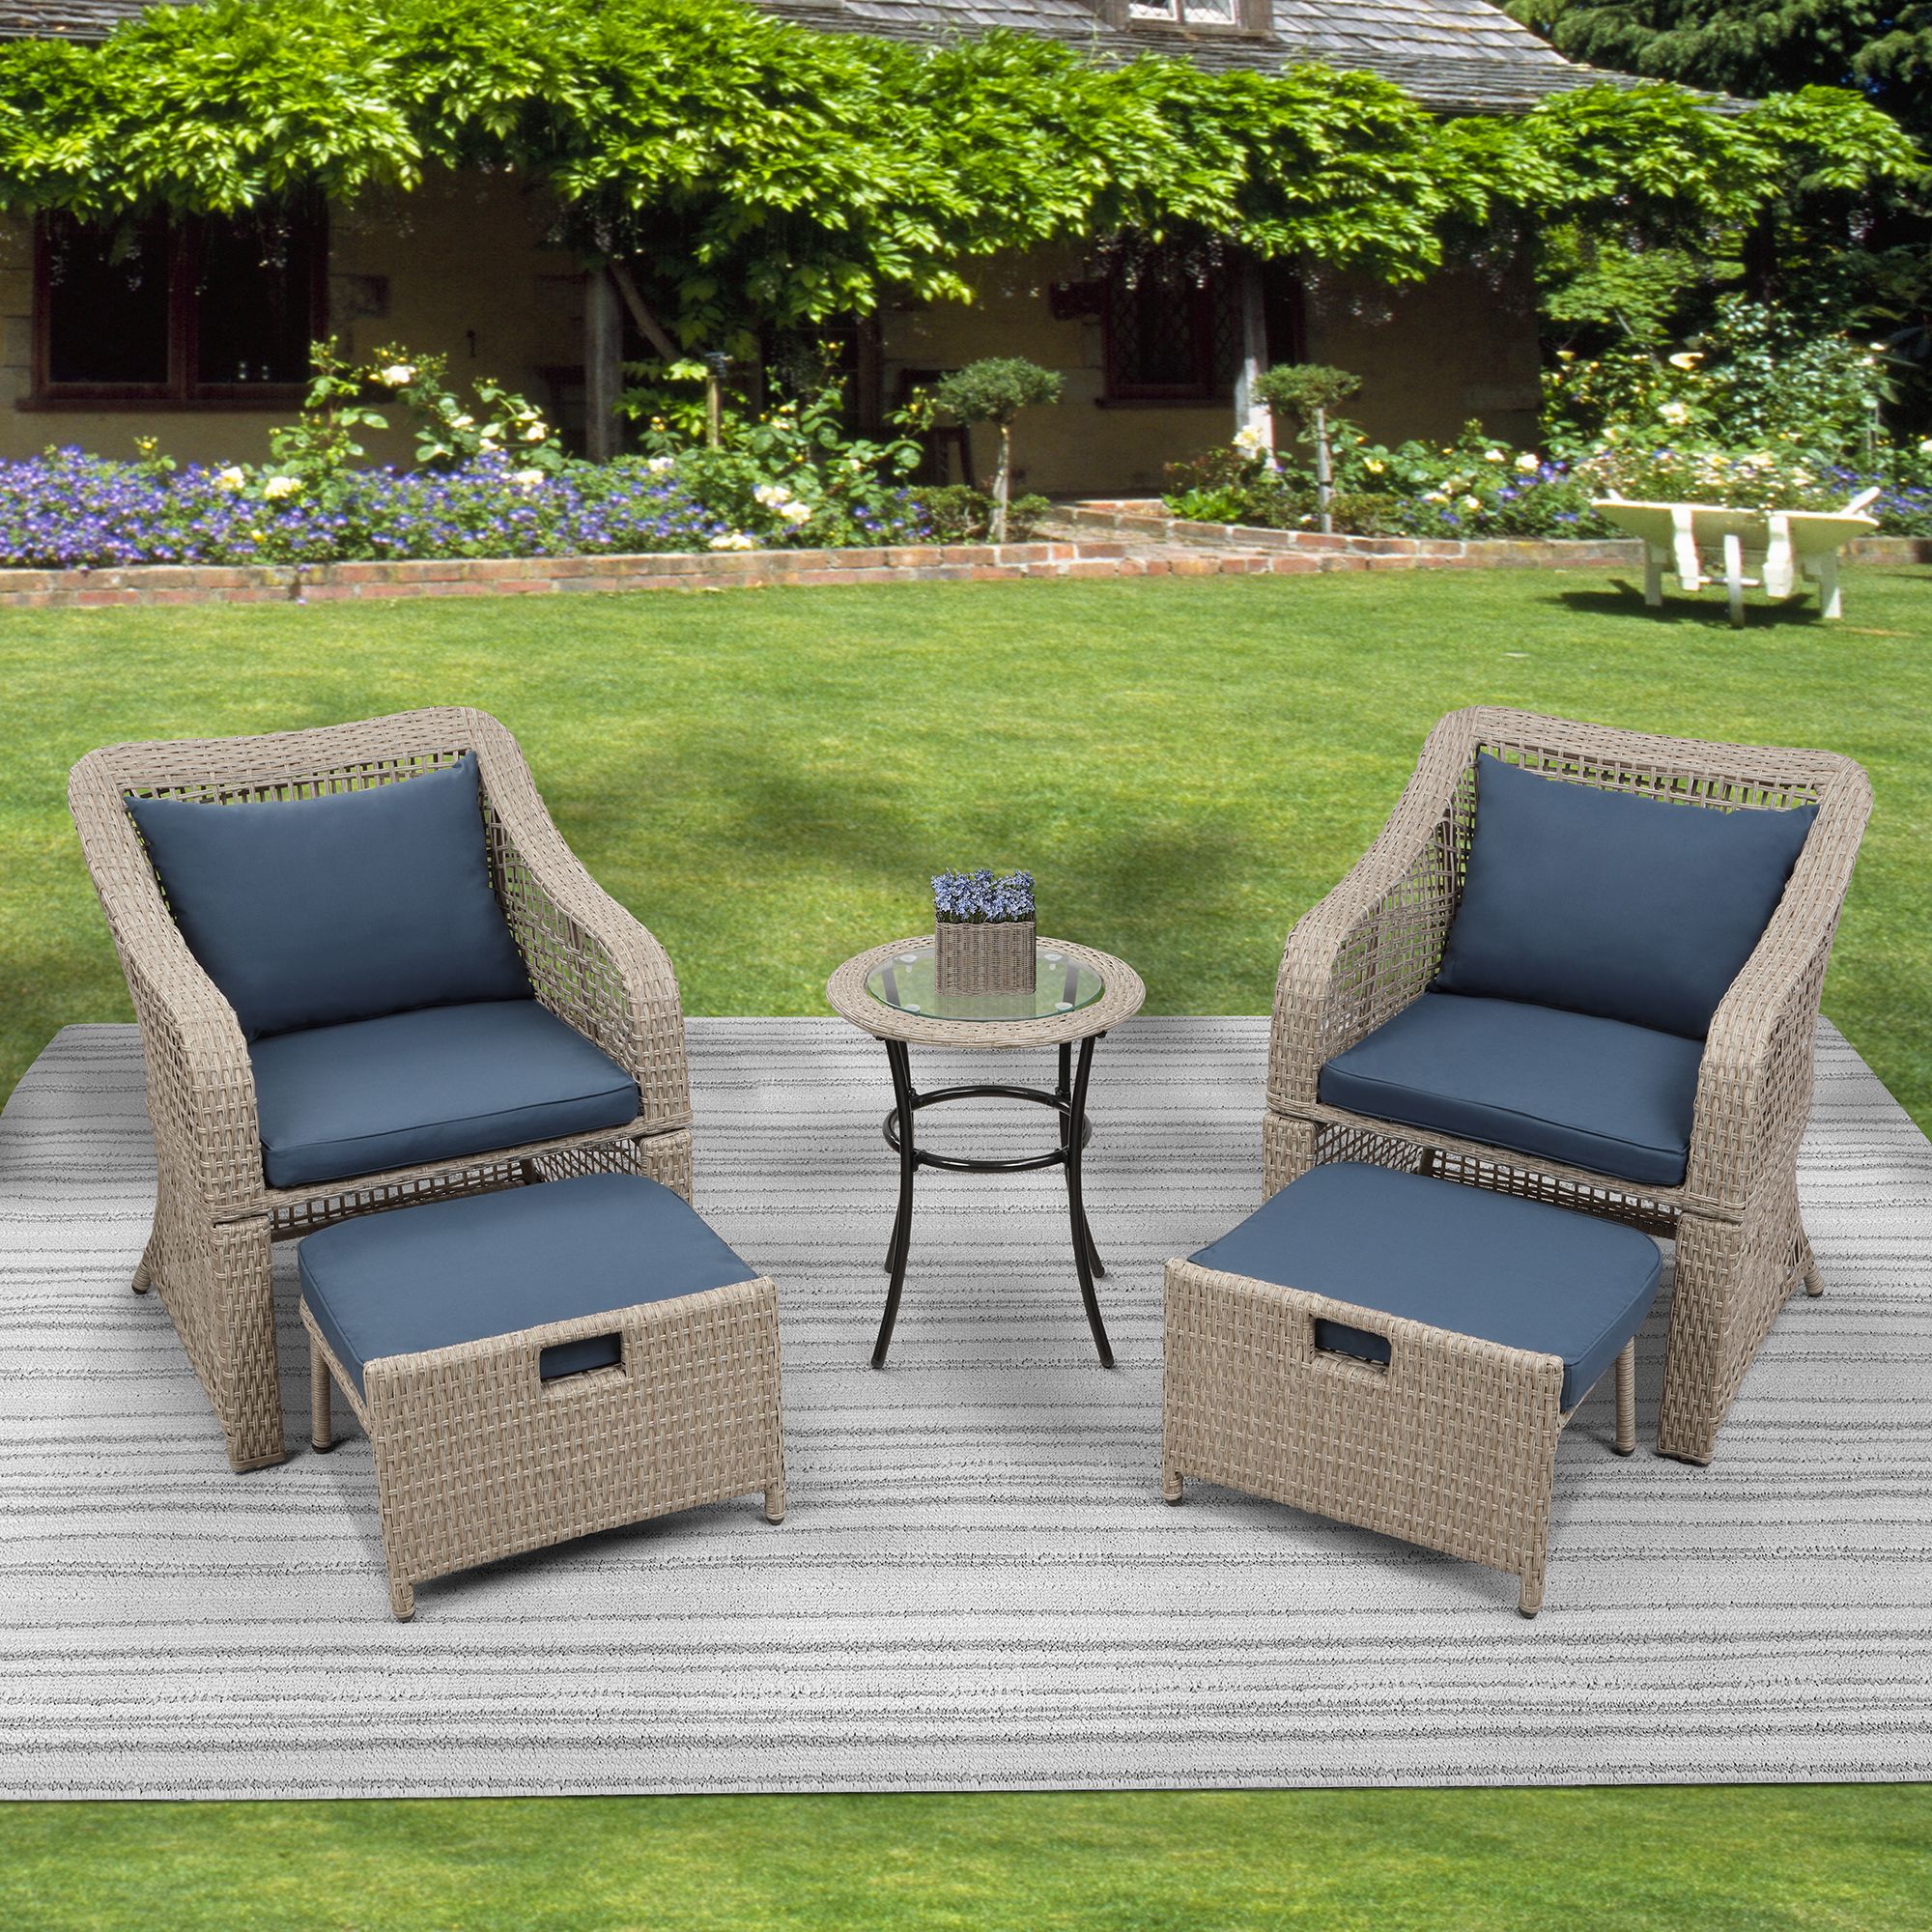 Current Outdoor Patio Furniture Sets, 5 Piece Wicker Patio Bar Set, 2pcs Arm Throughout Natural Woven Outdoor Chairs Sets (View 15 of 15)